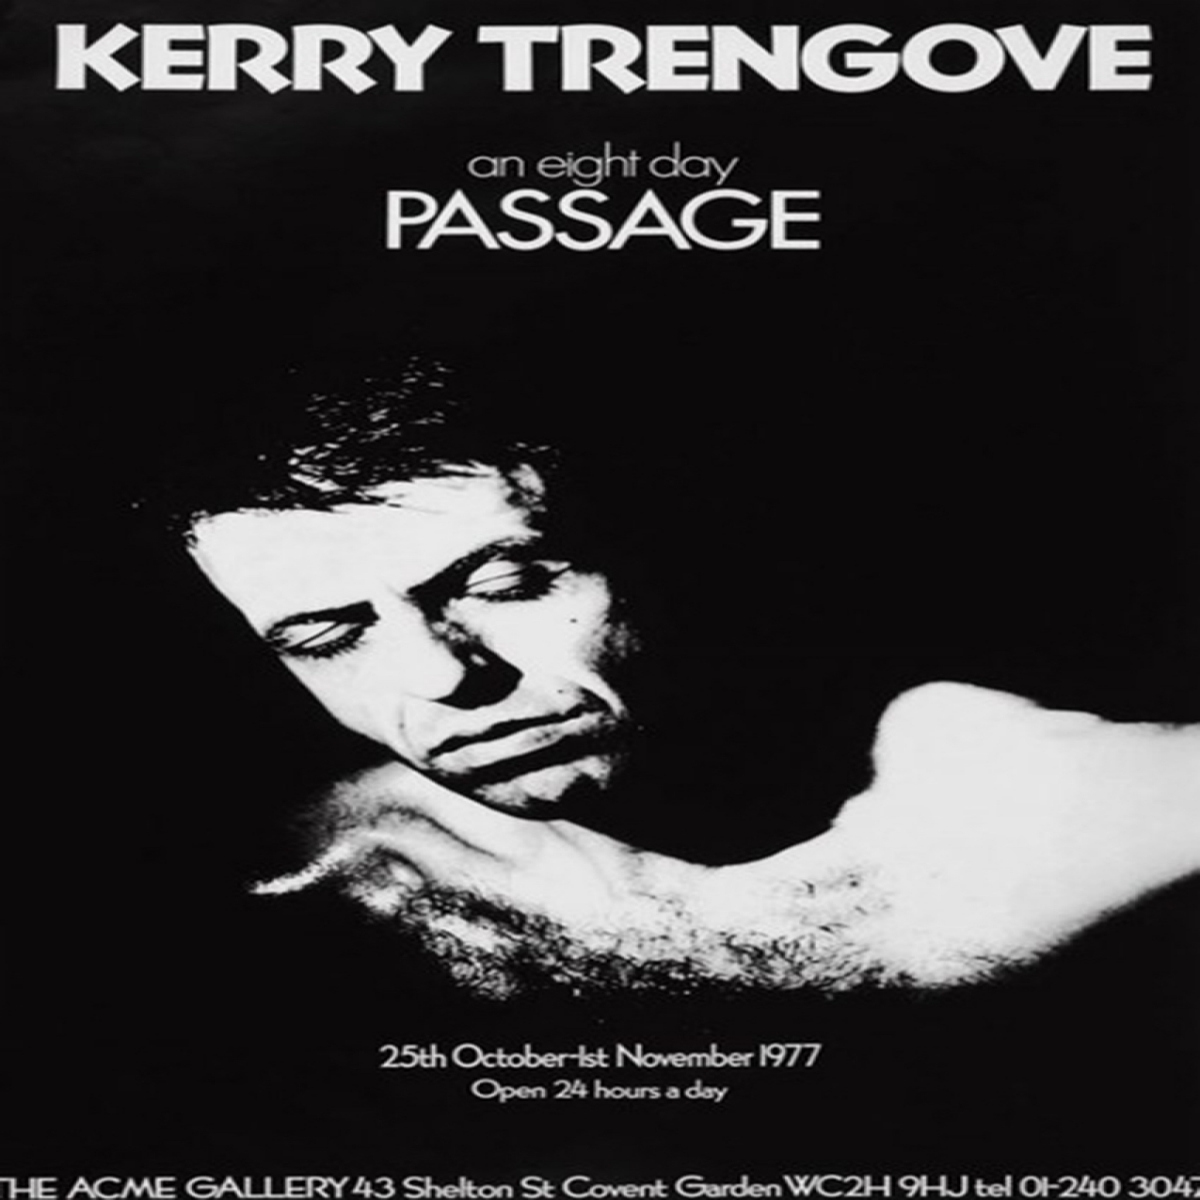 Exhibition-Poster-Terry-Trengove-An-Eight-Day-Passage-1977.jpg